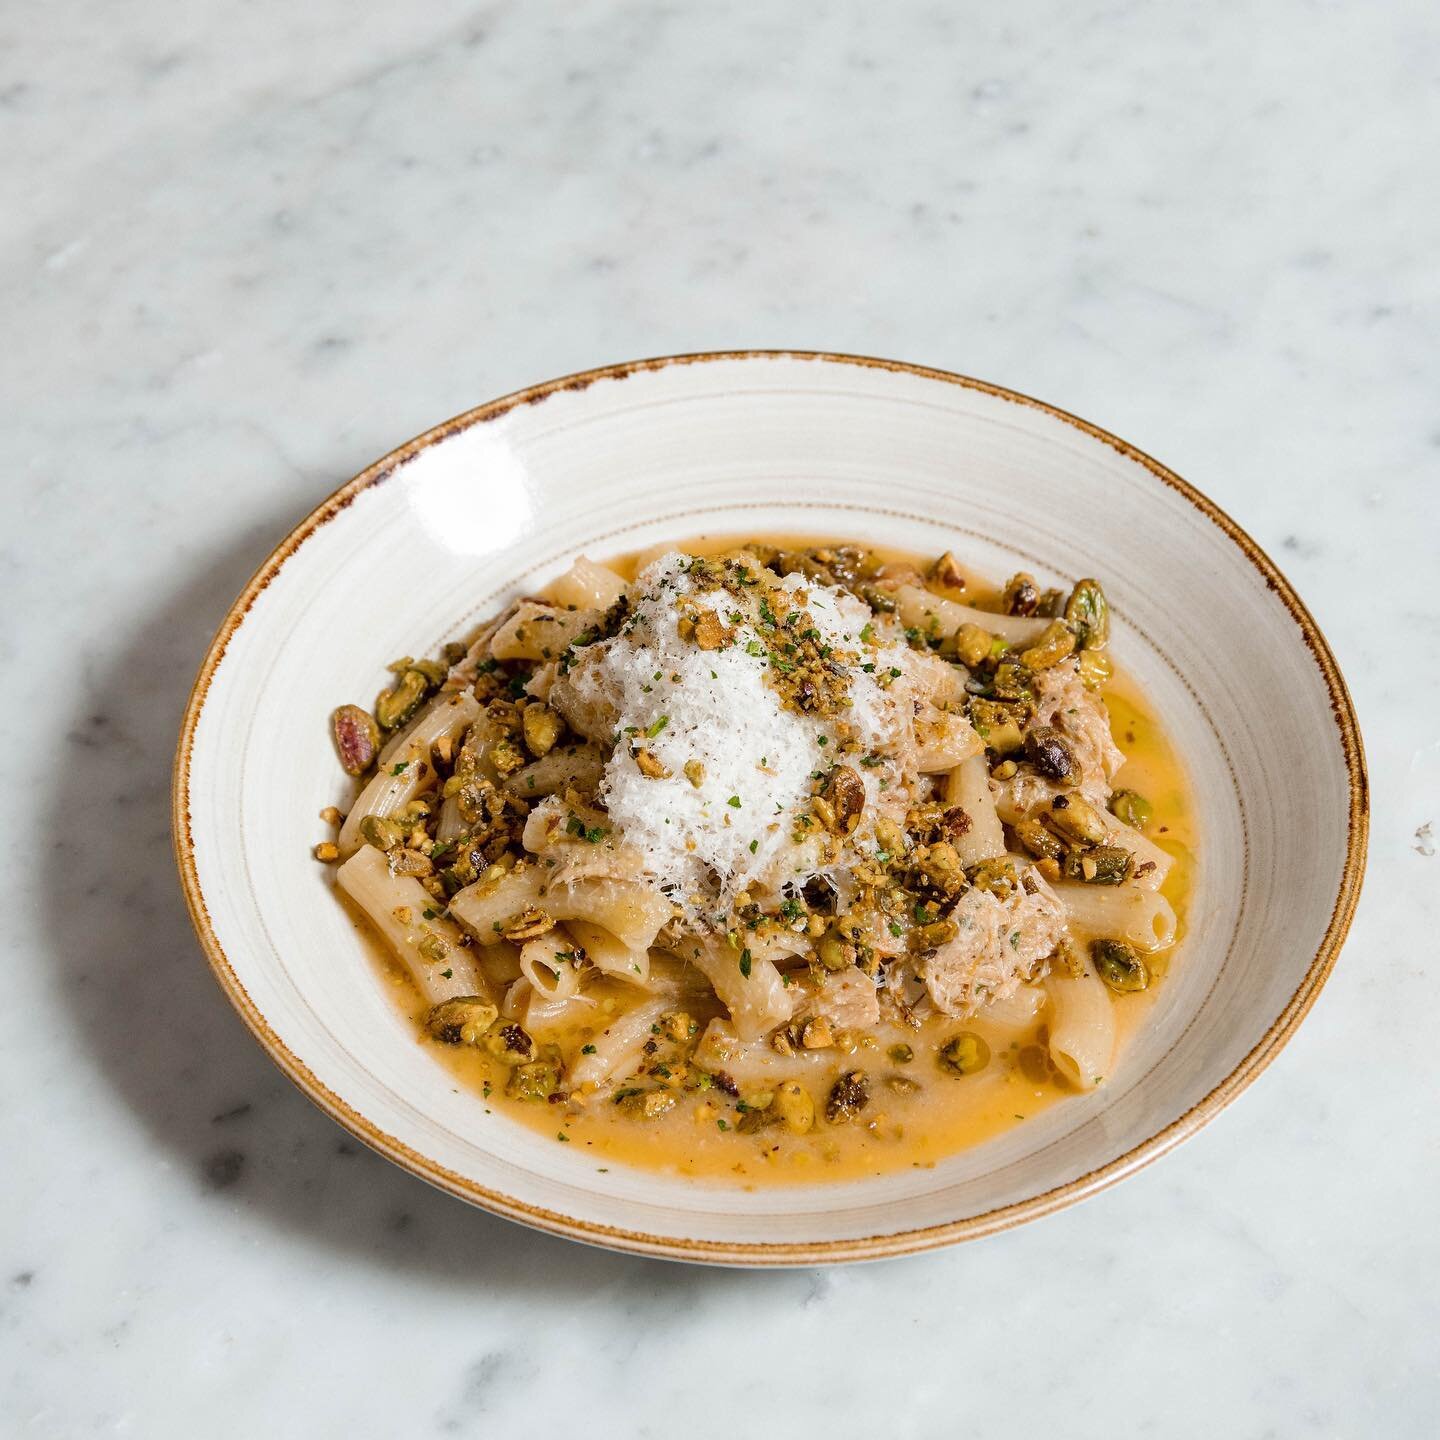 Back on the menu:
House made maccheroni, with rabbit rag&uacute;, guanciale, pistachio and parmigiano reggiano 🤤🍷